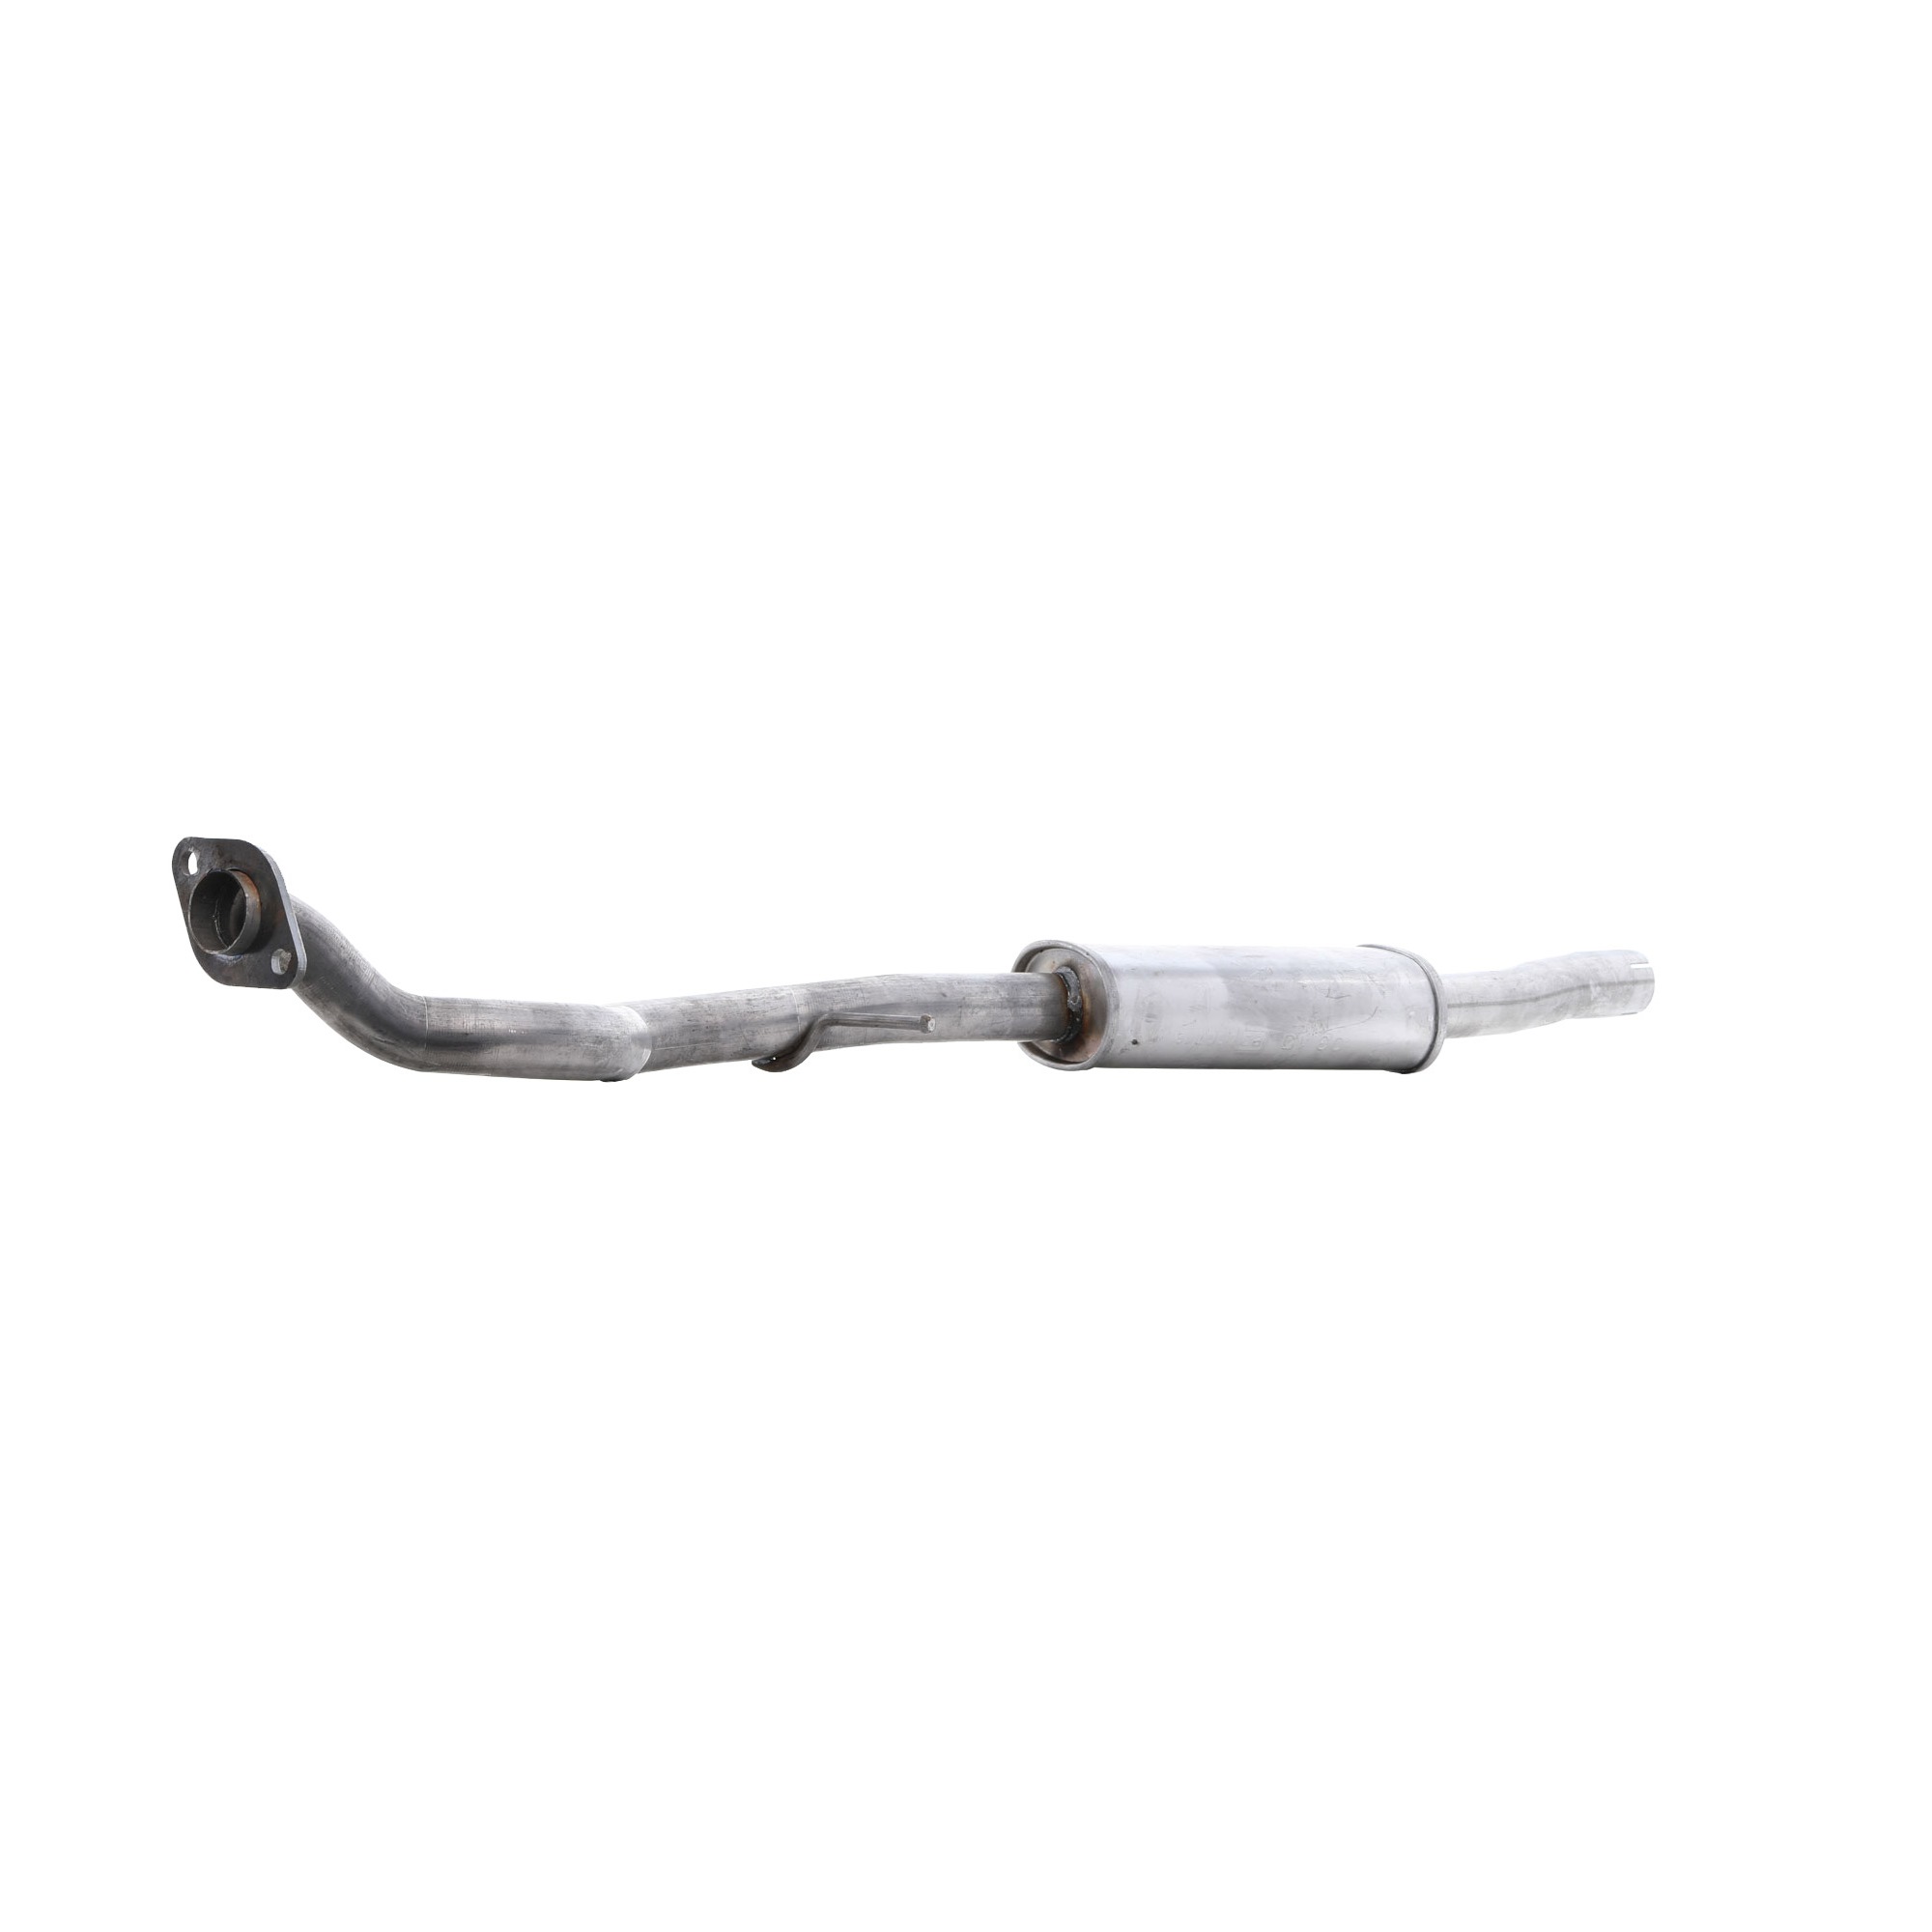 BMW 5 Series Middle silencer 15408192 POLMO 03.15 online buy